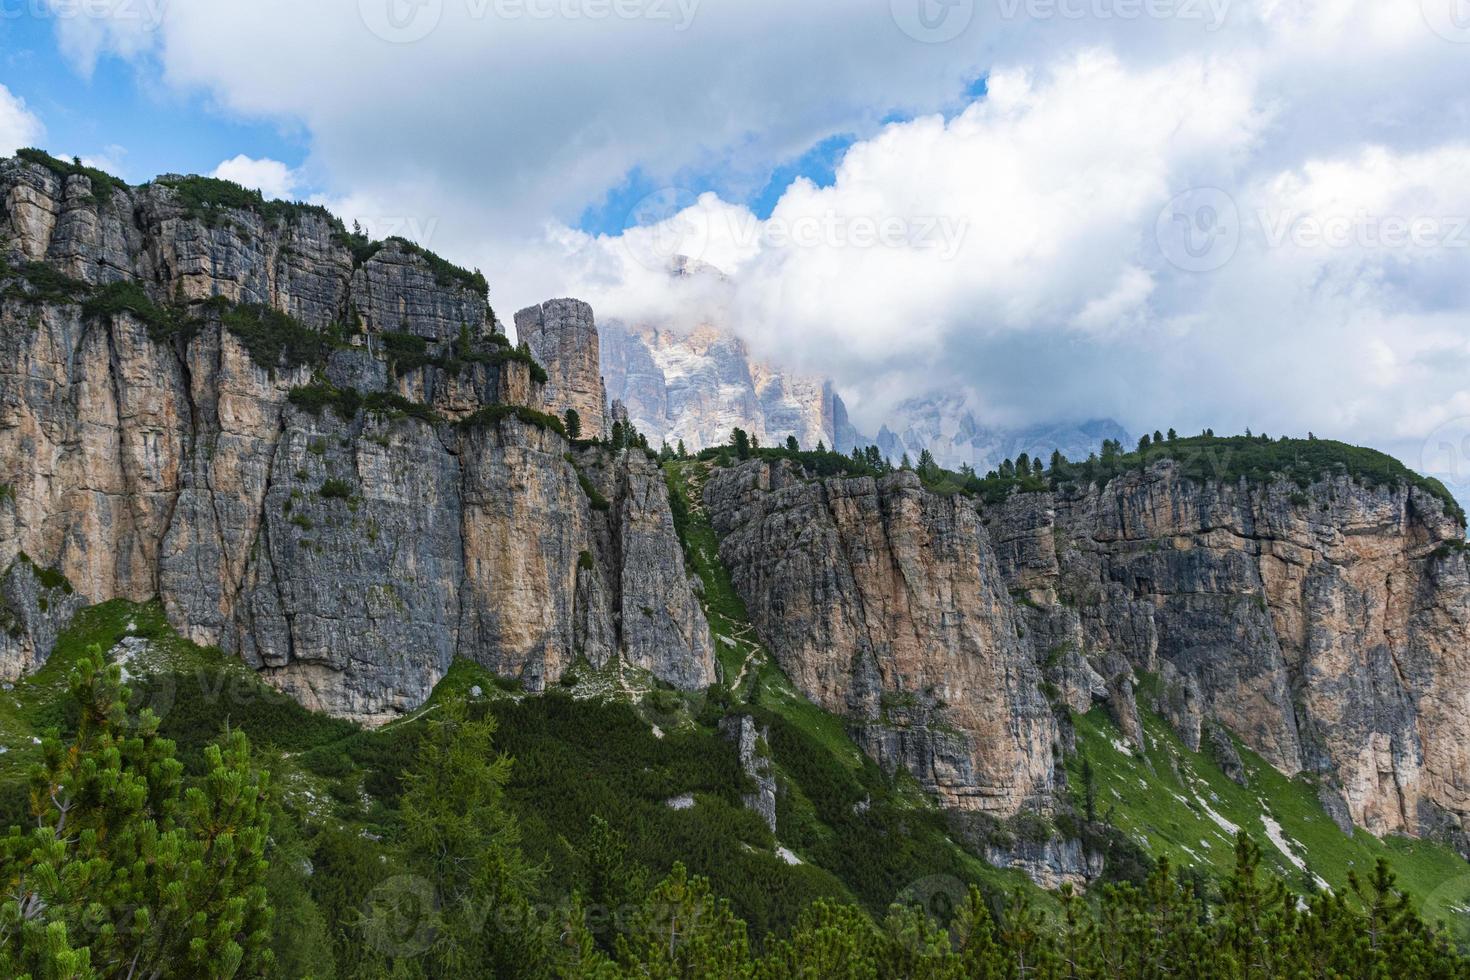 Clouds over the peaks of the Dolomites photo